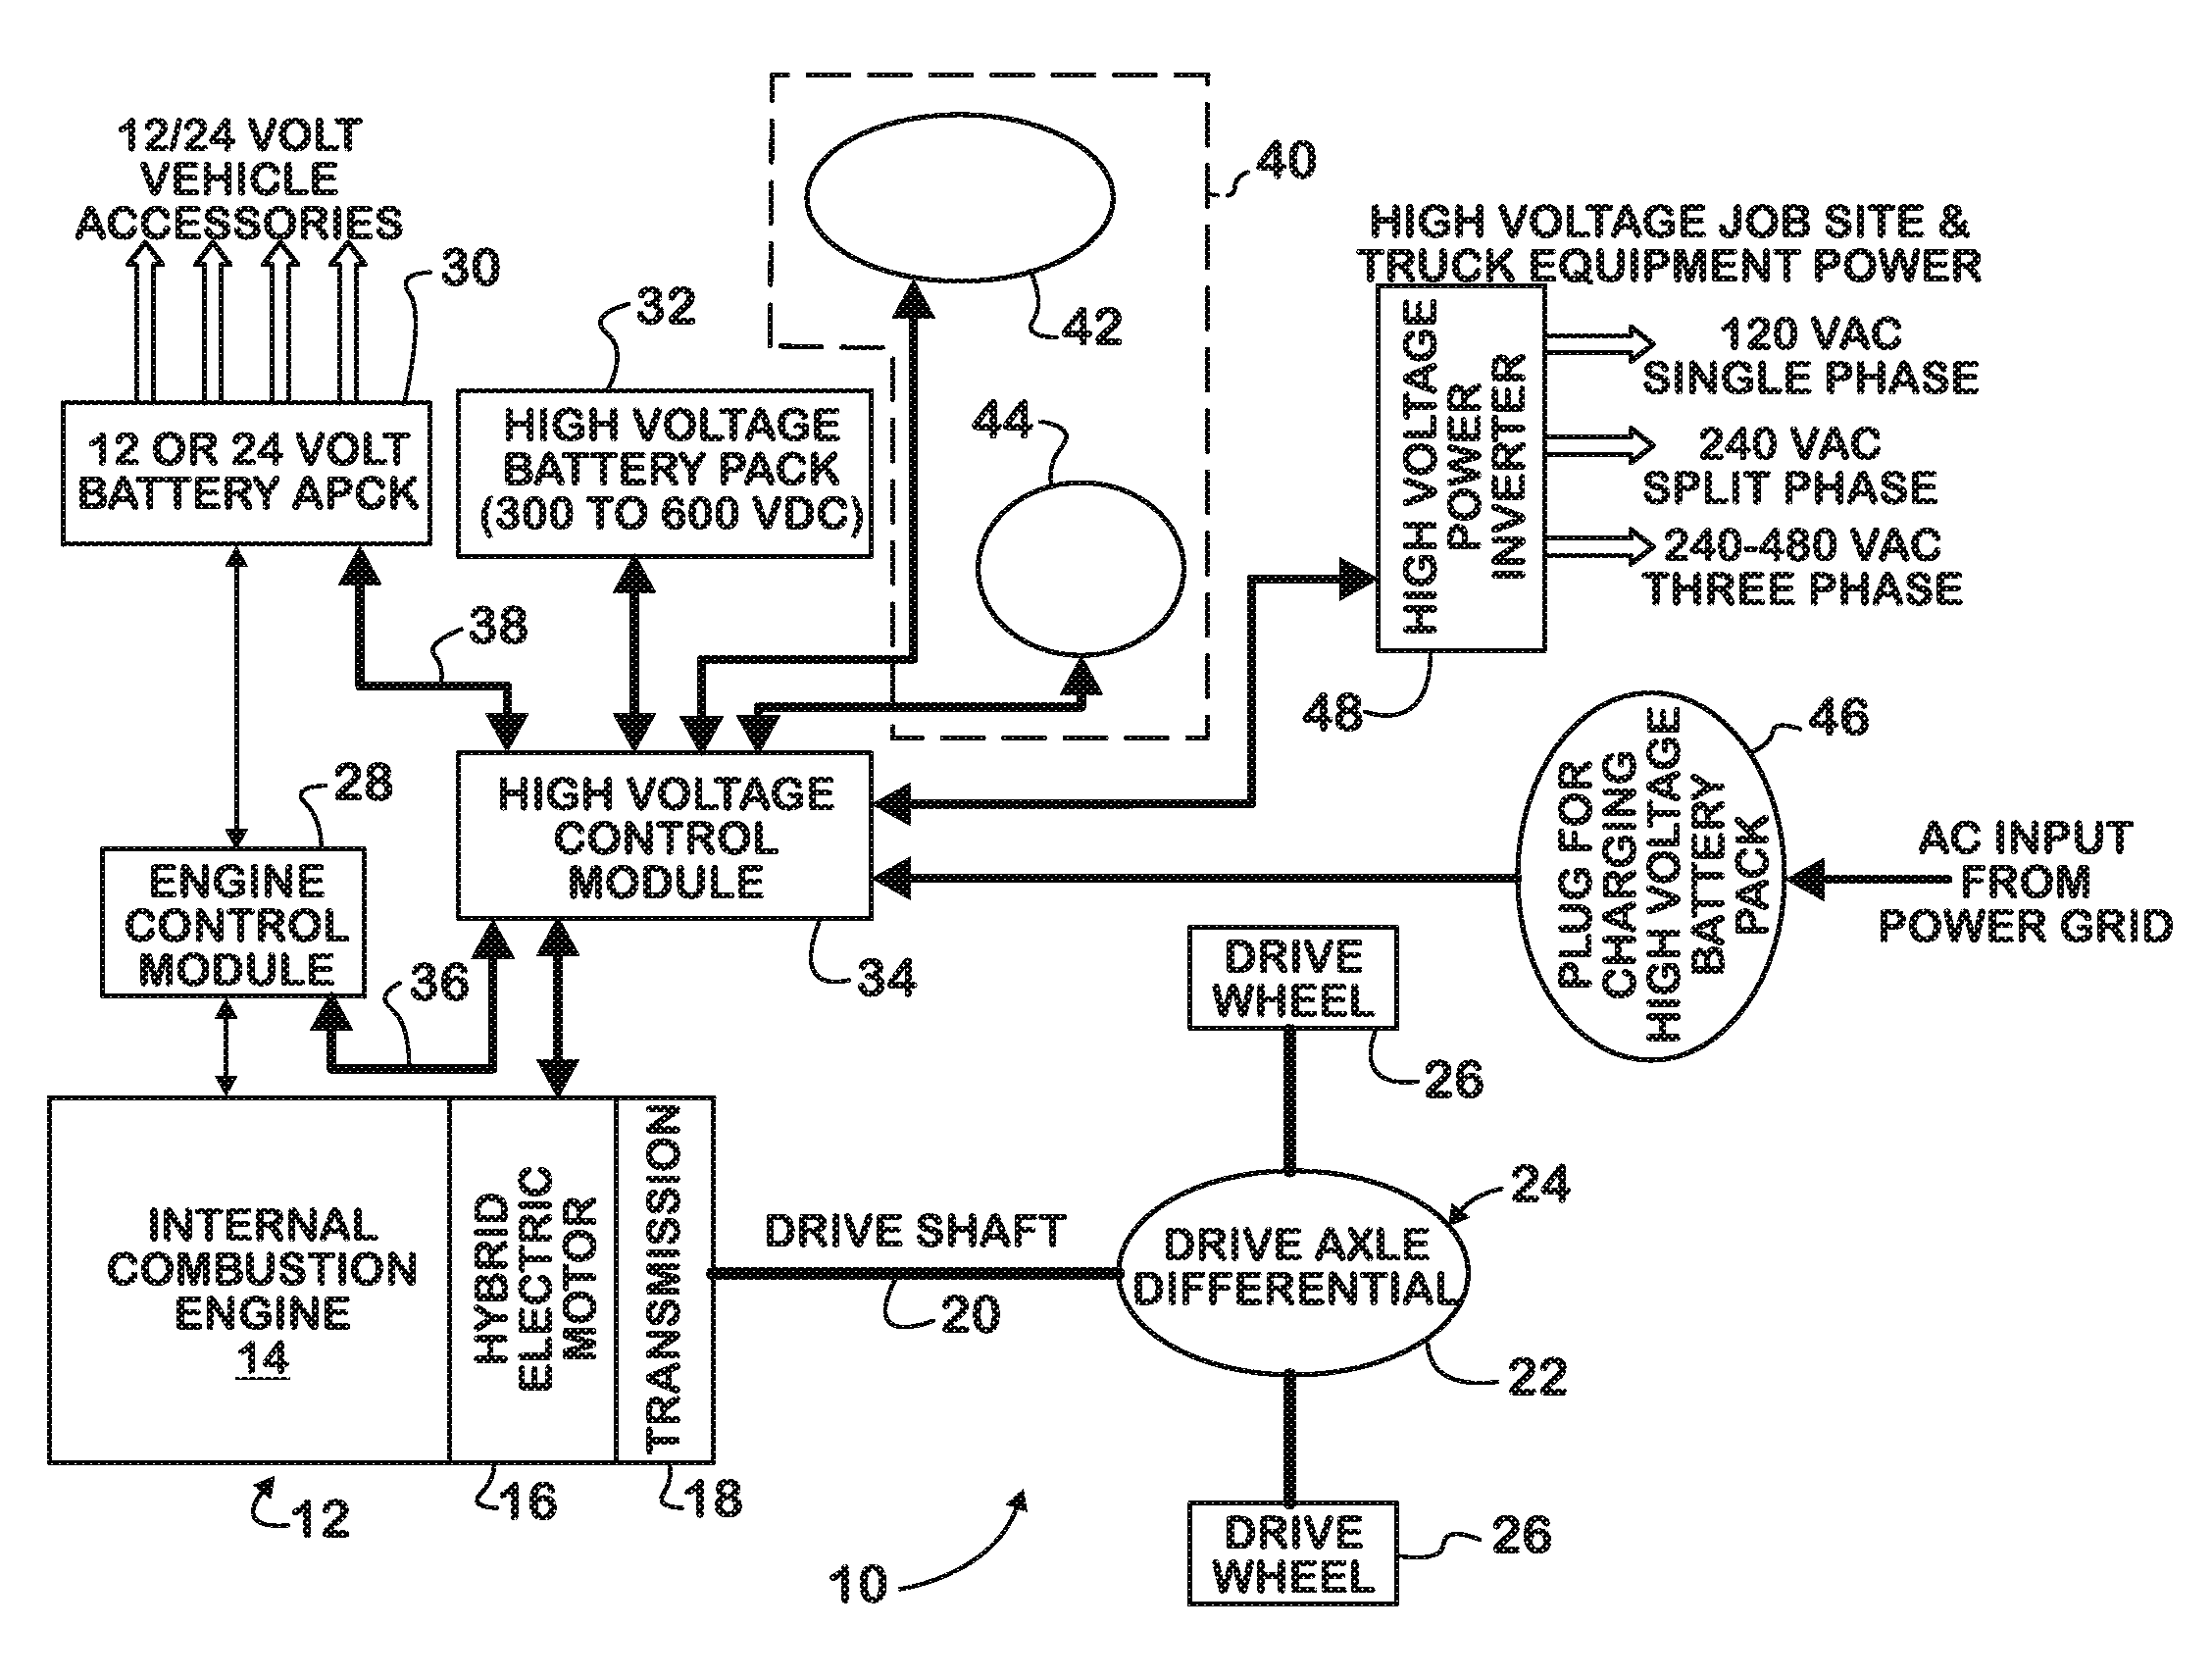 Battery pack management strategy in a hybrid electric motor vehicle